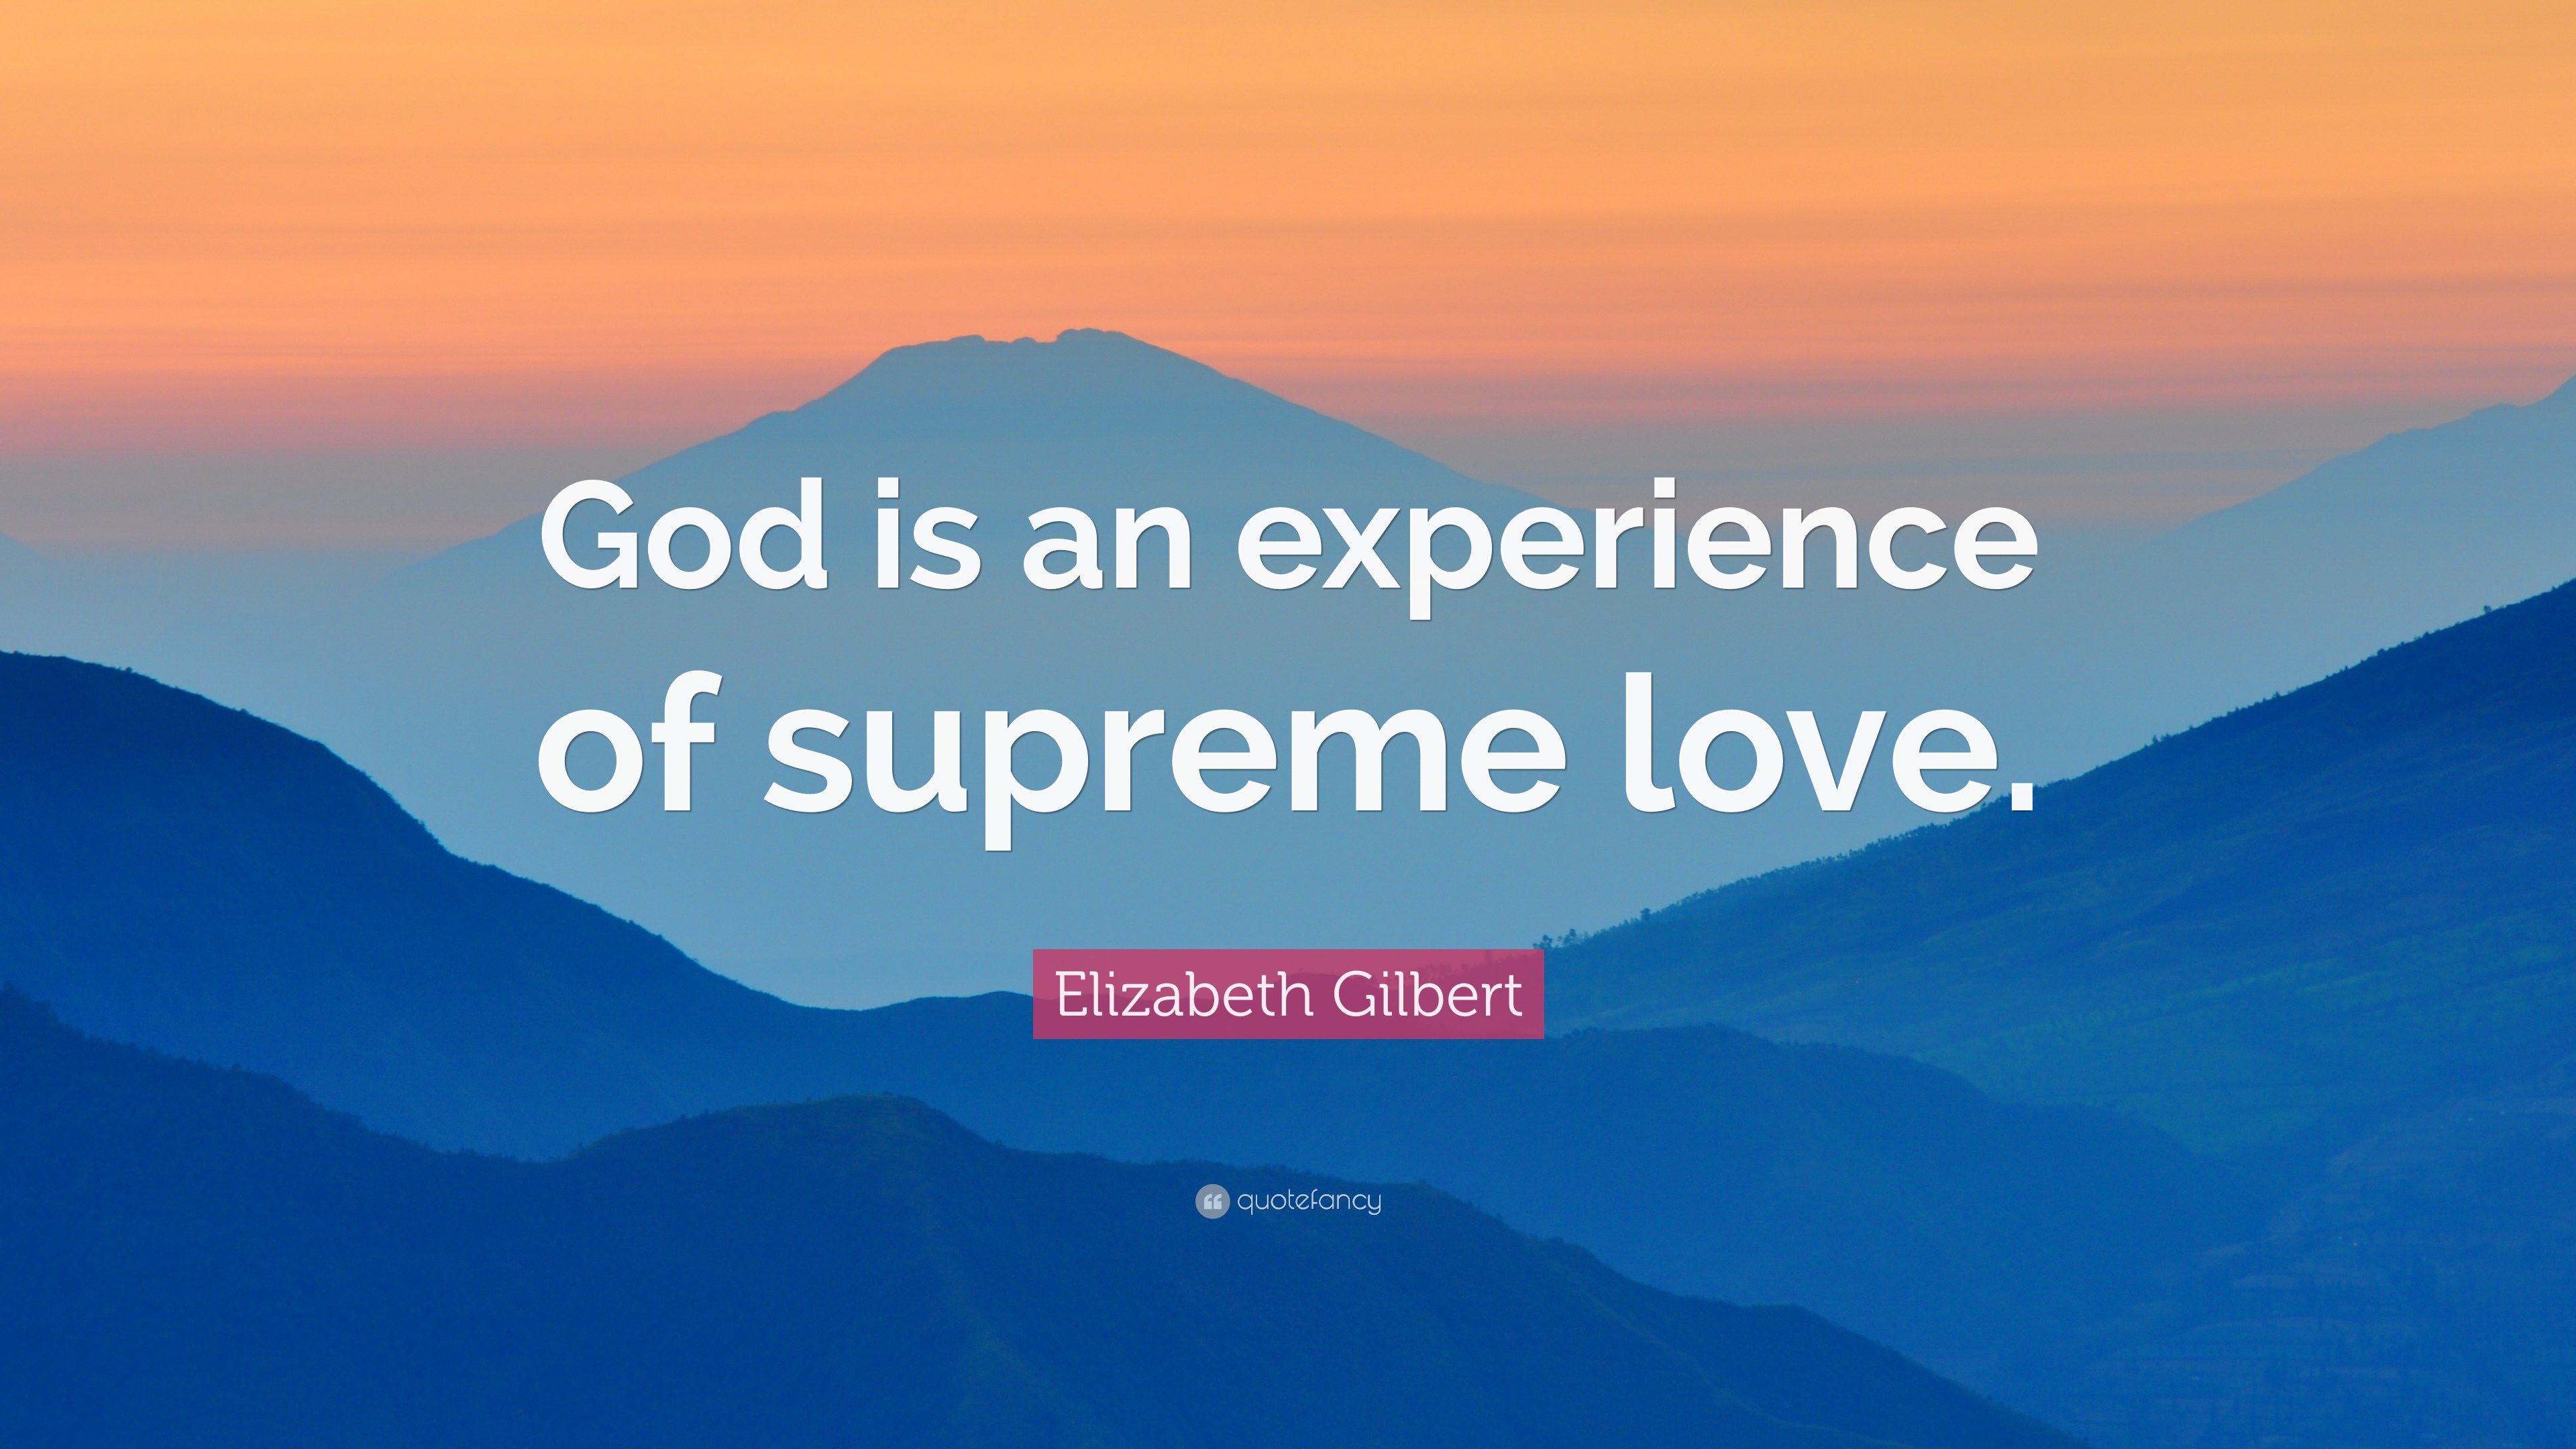 Elizabeth Gilbert Quote: “God is an experience of supreme